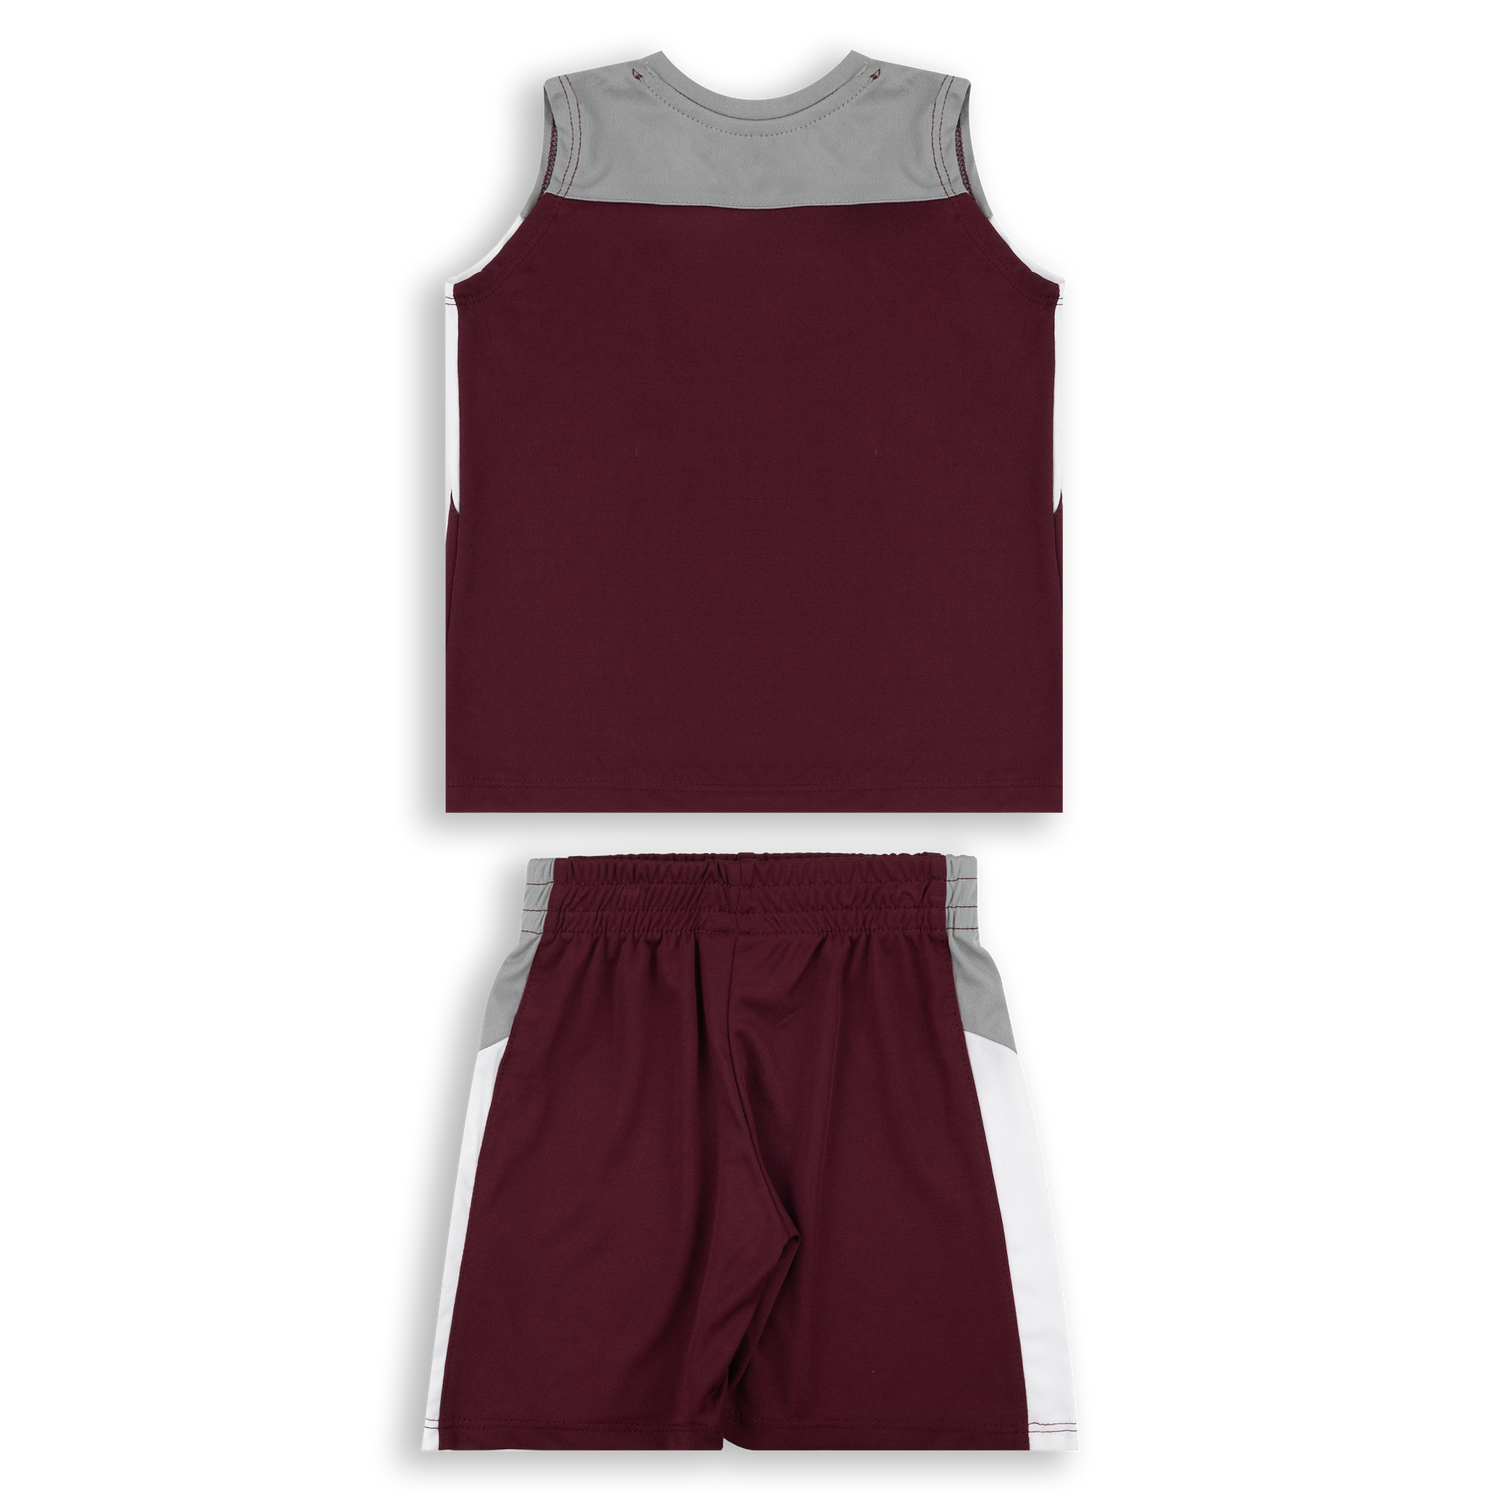 Texas A&M Ozone Tank and Short Set